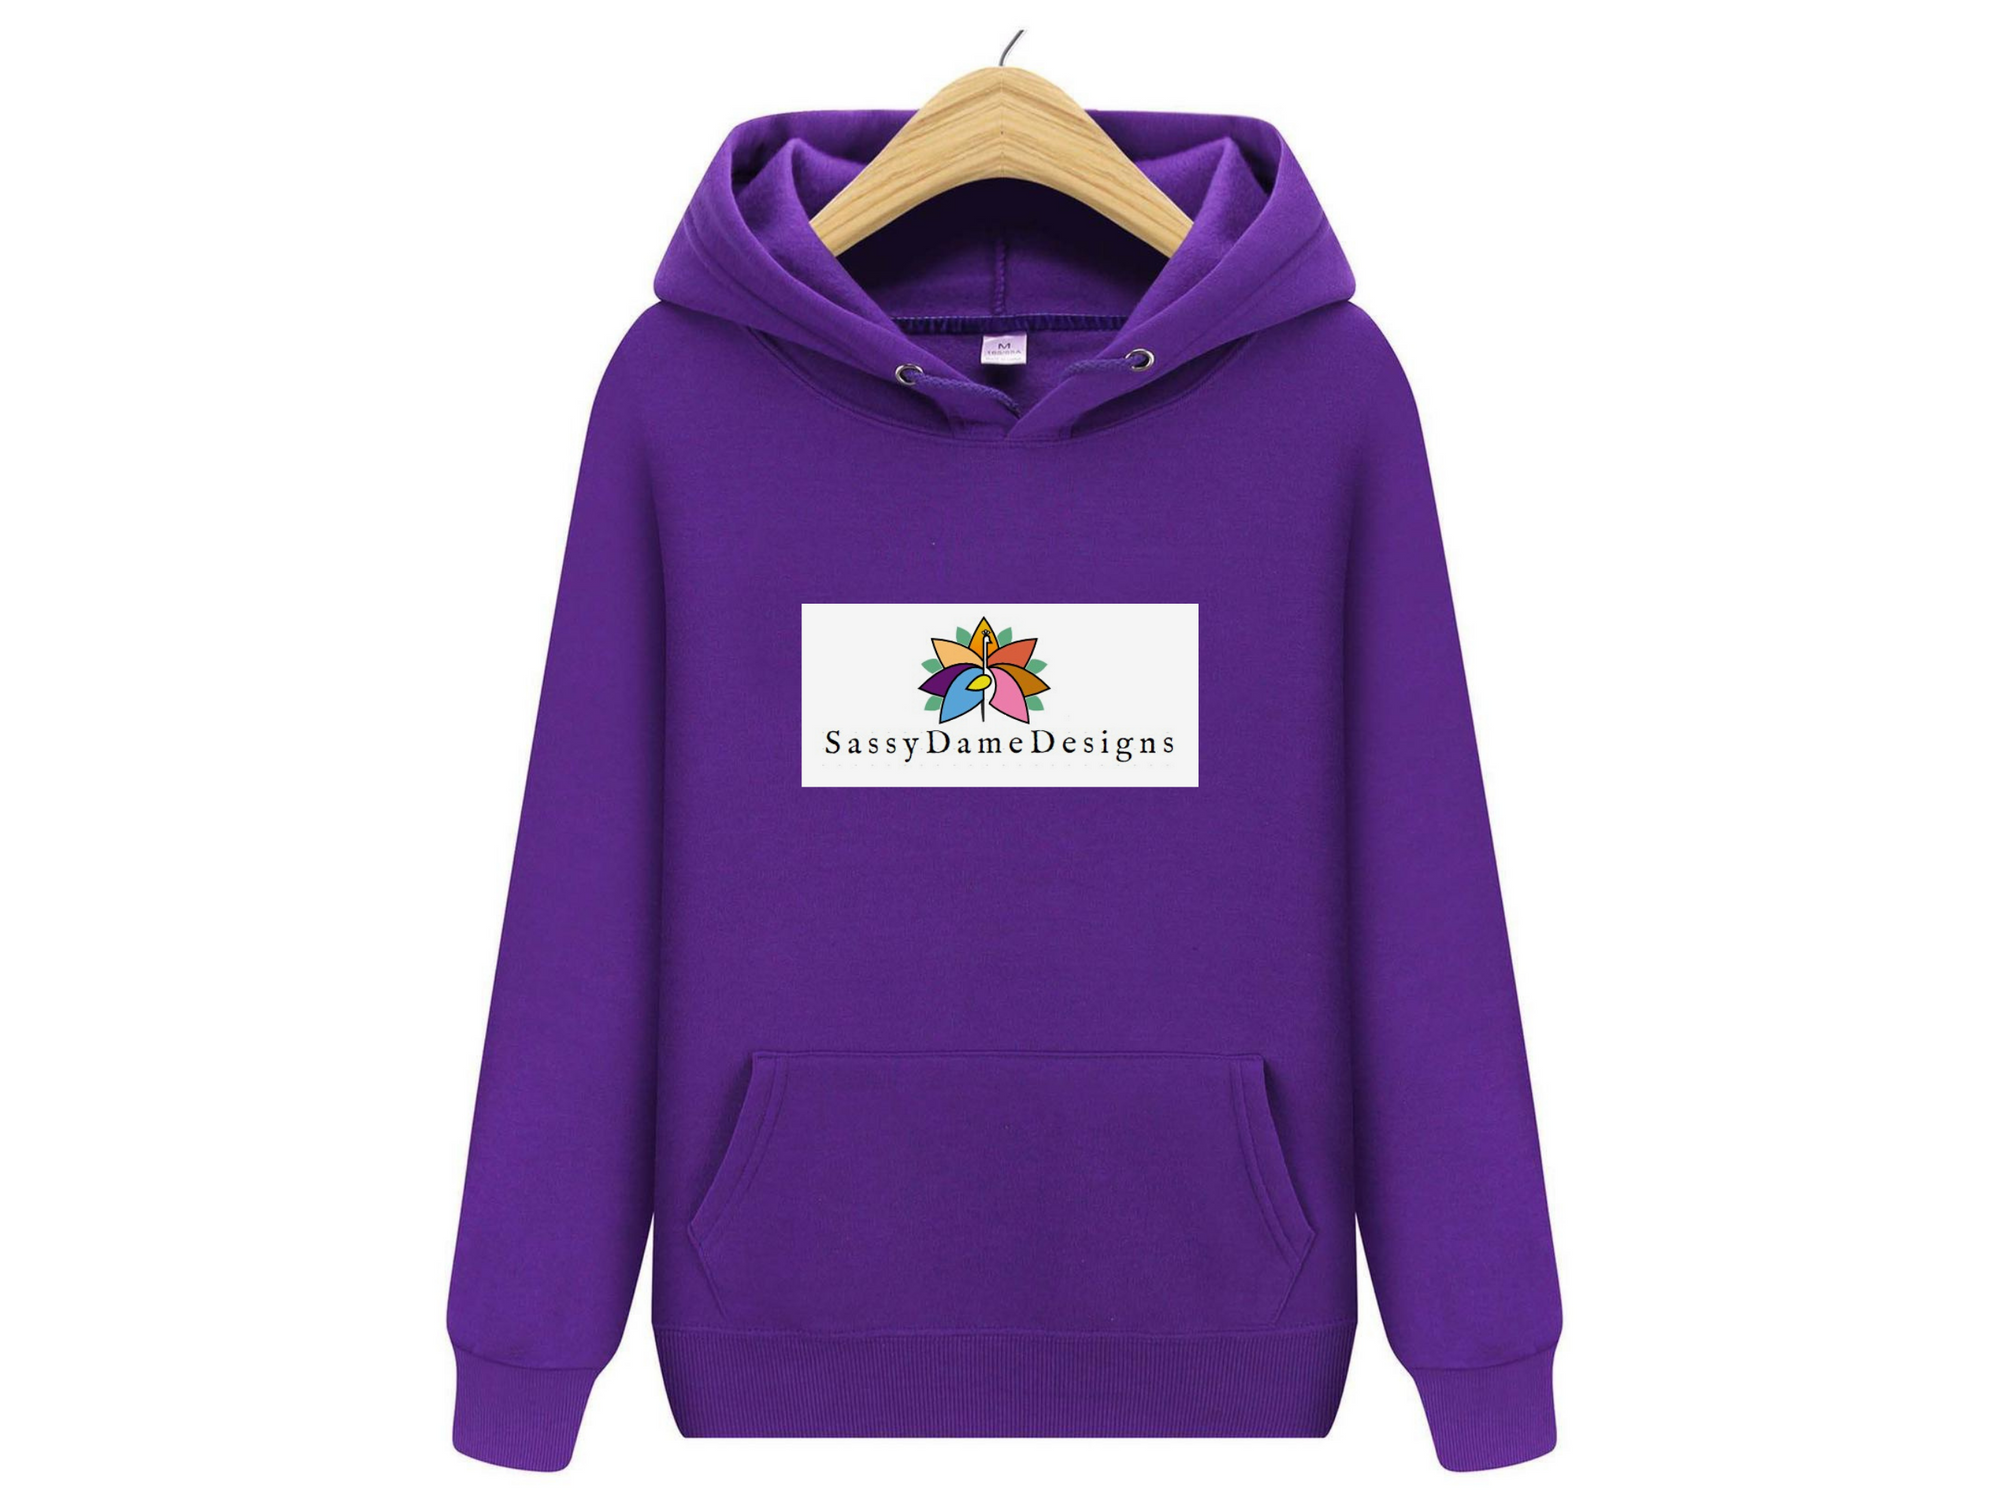 Ugyldigt morgenmad tilbehør Polyester Hoodies/Wholesale Hoodies /Hoodies/Sublimation Hoodies /Cheap  sublimation hoodies - SassyDame Designs